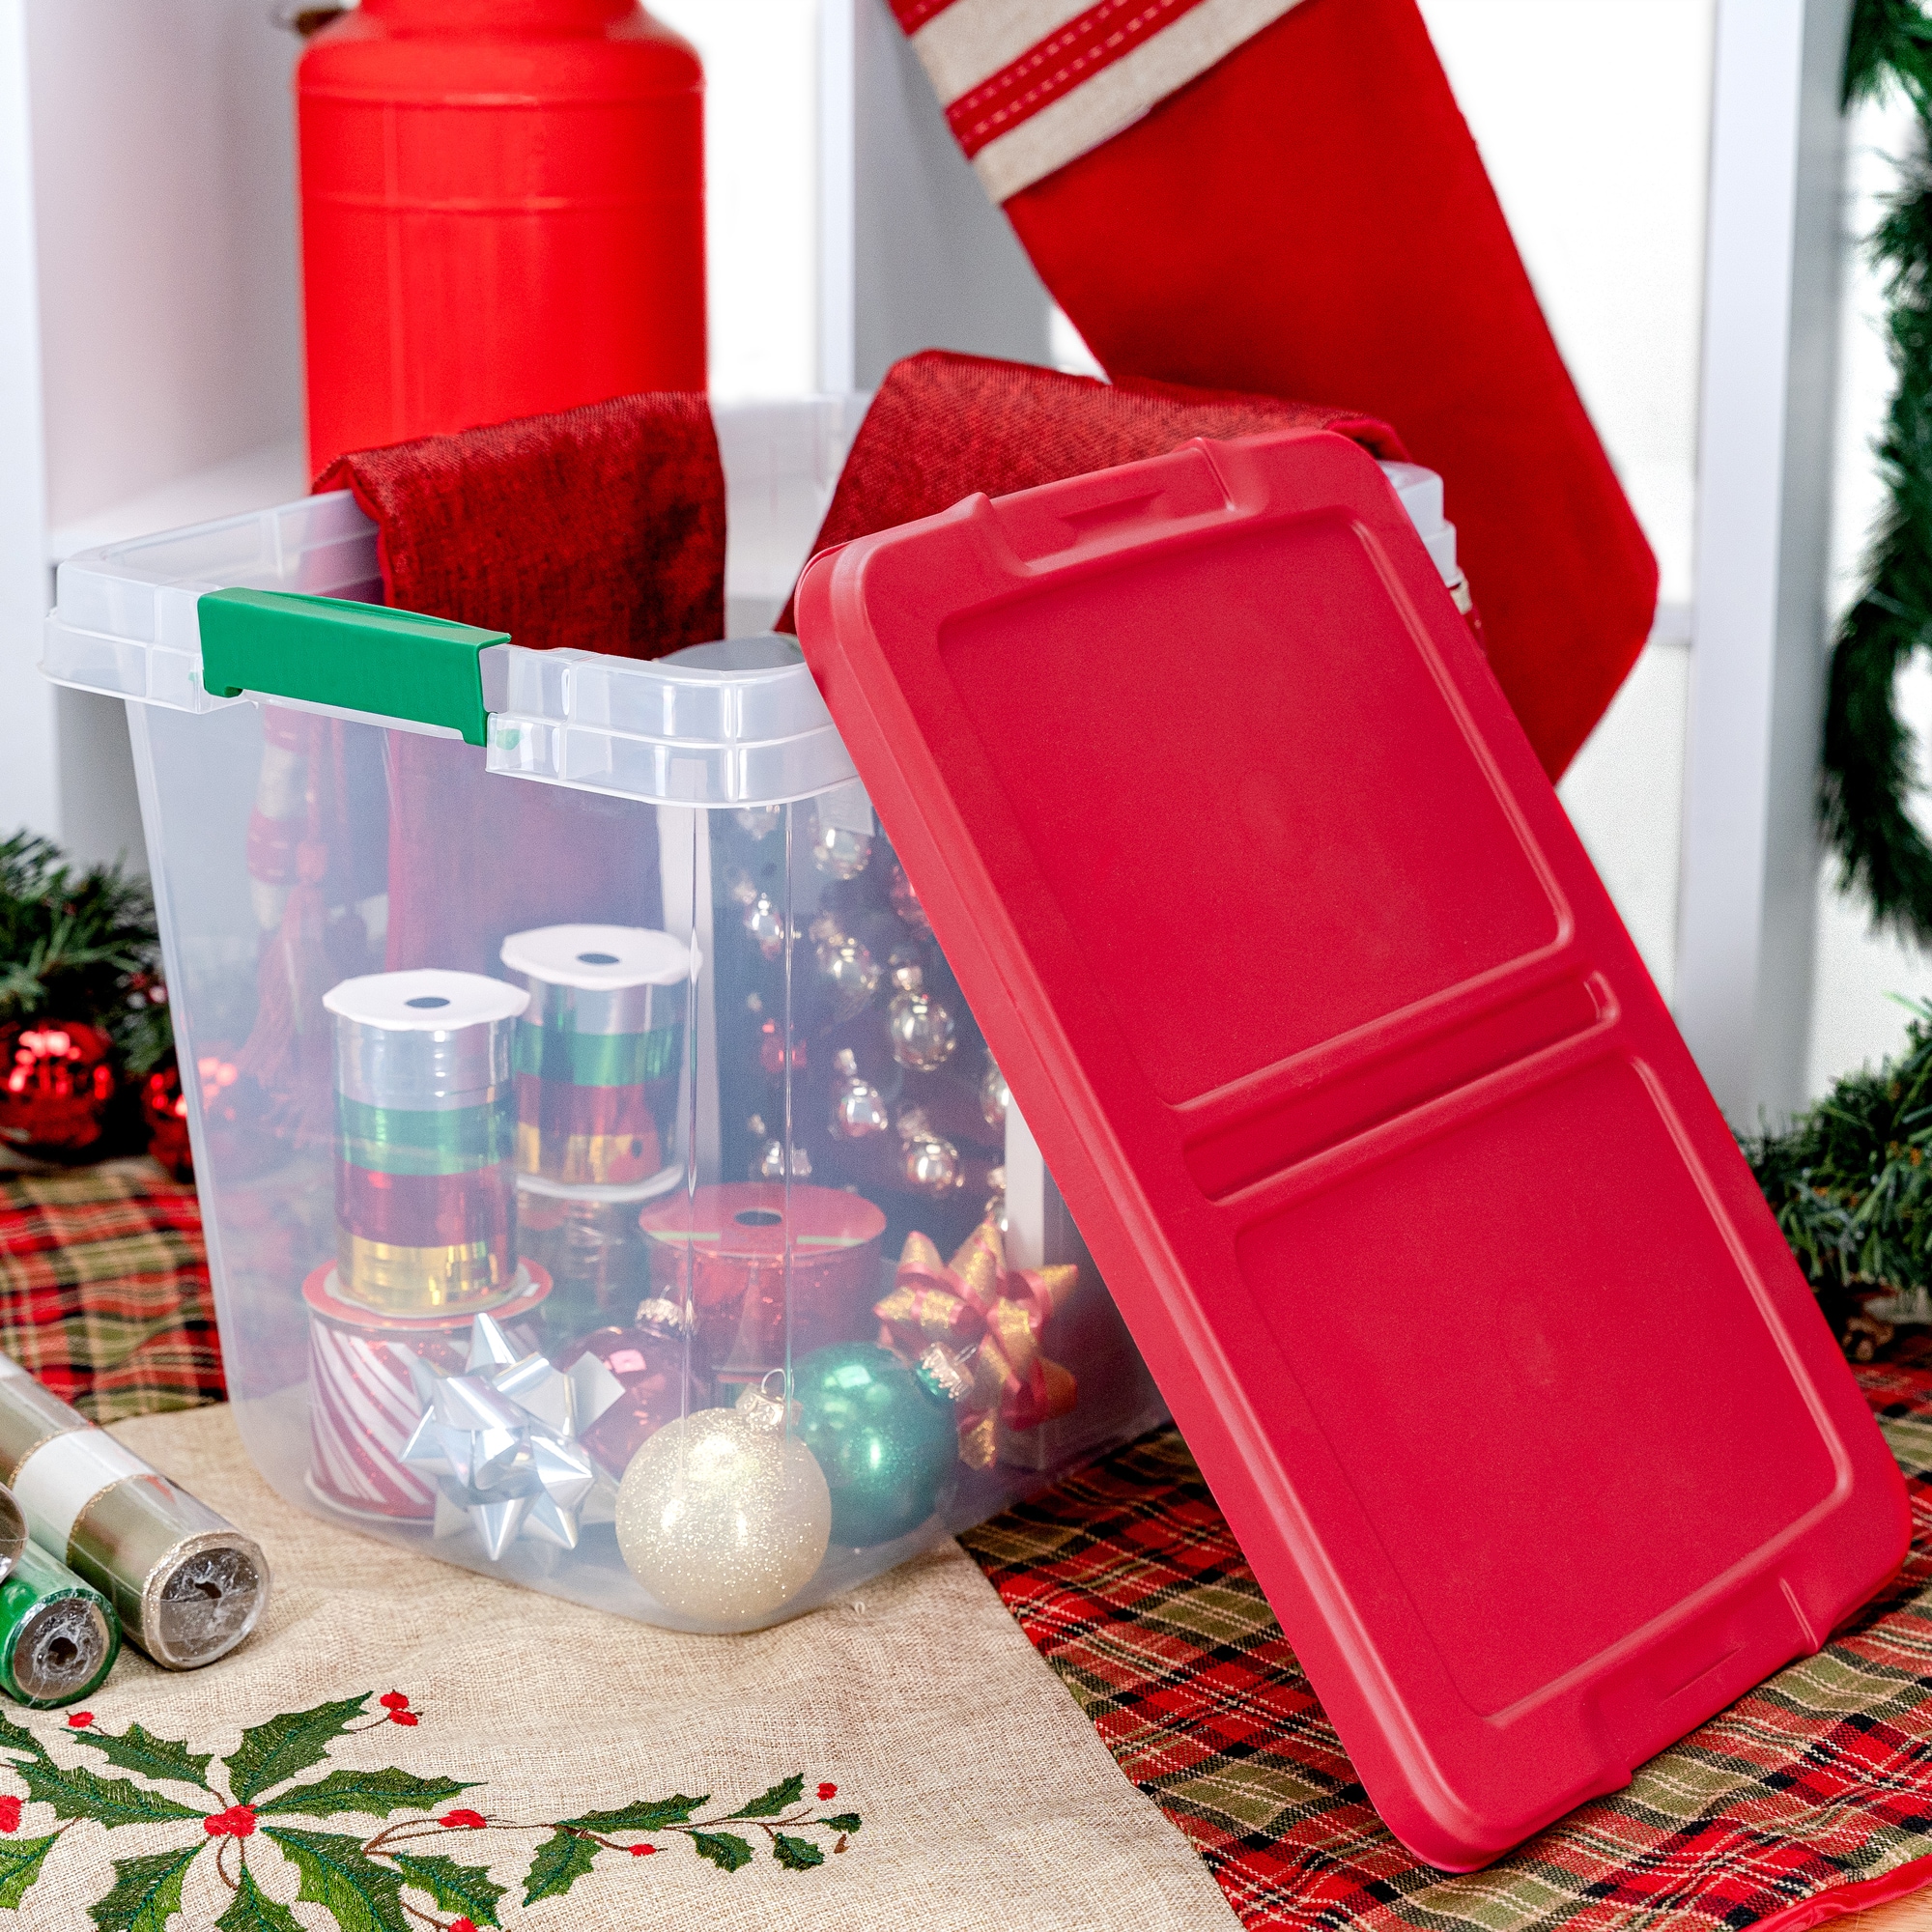 Find good deals on after-holiday storage bags and bins 